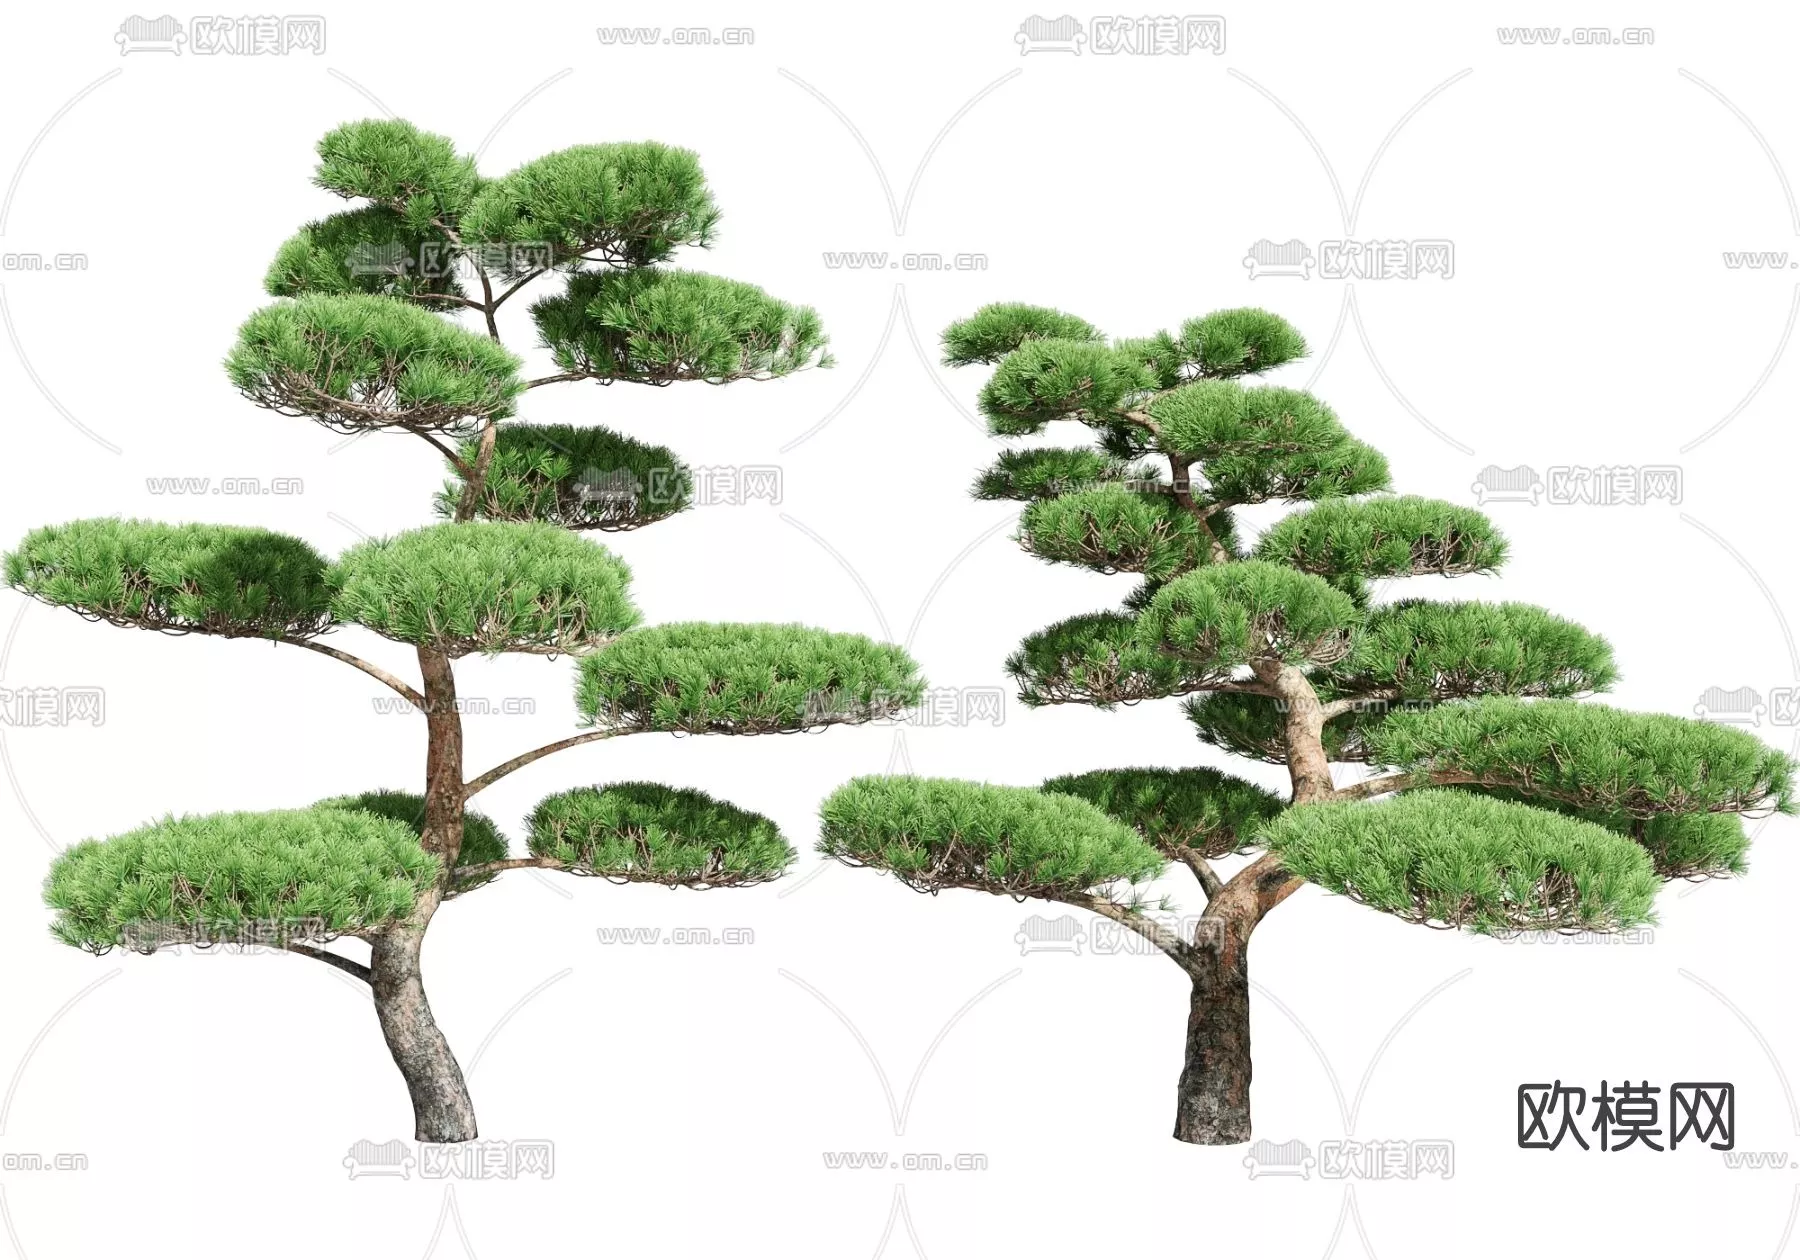 MODERN TREE - SKETCHUP 3D MODEL - VRAY OR ENSCAPE - ID15334